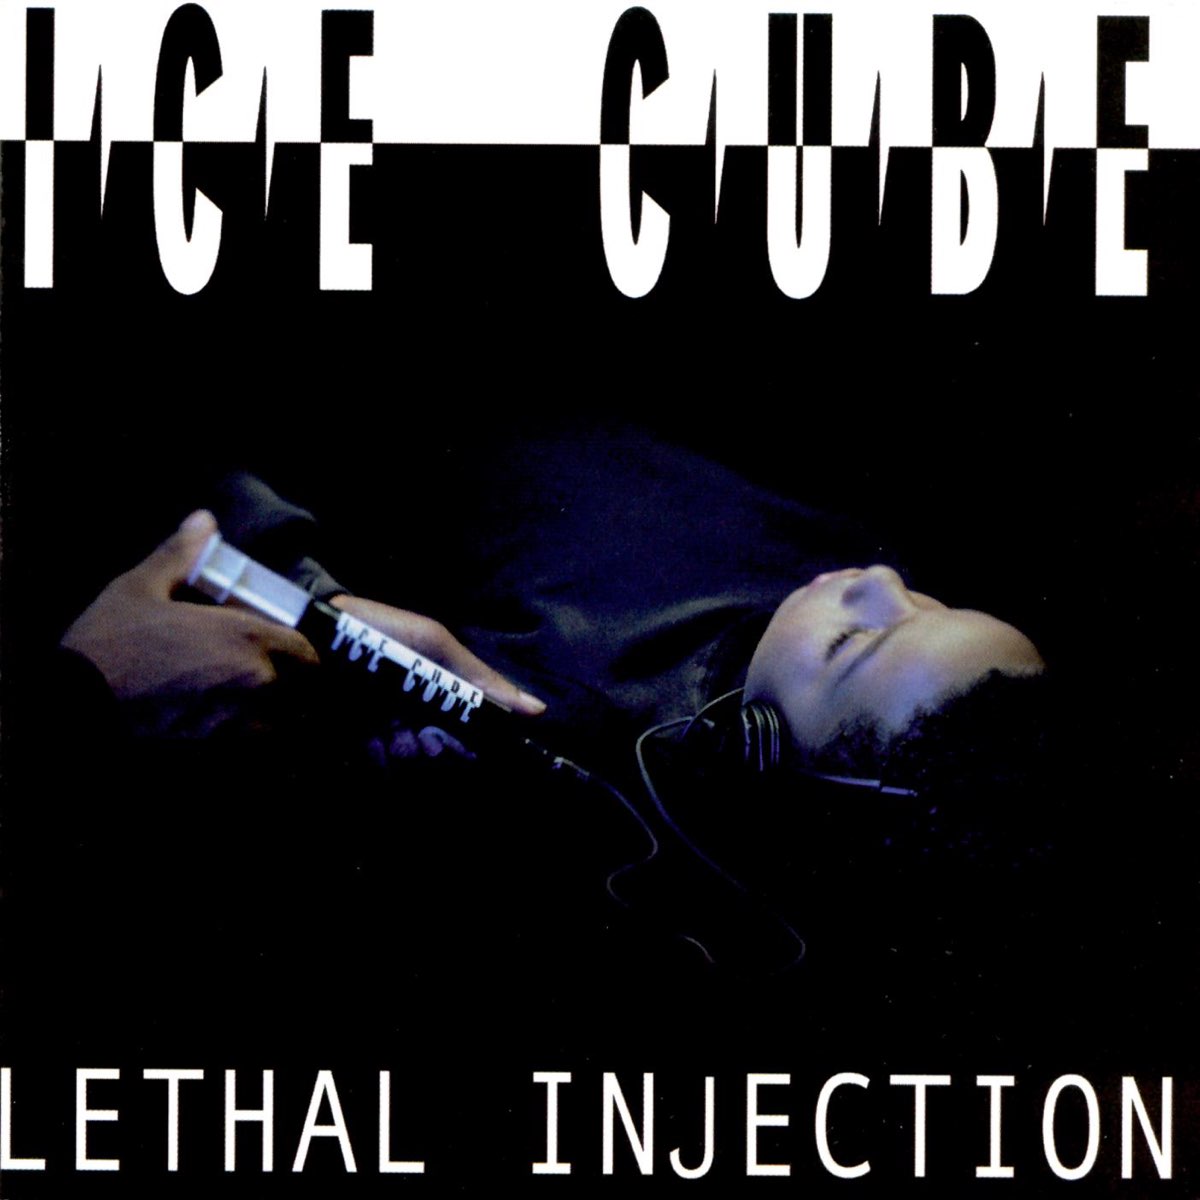 Ice cube down down. Ice Cube Lethal Injection 1993. Ice Cube Lethal Injection. Letal Injection Ice Cube. Ice Cube you know how we do.